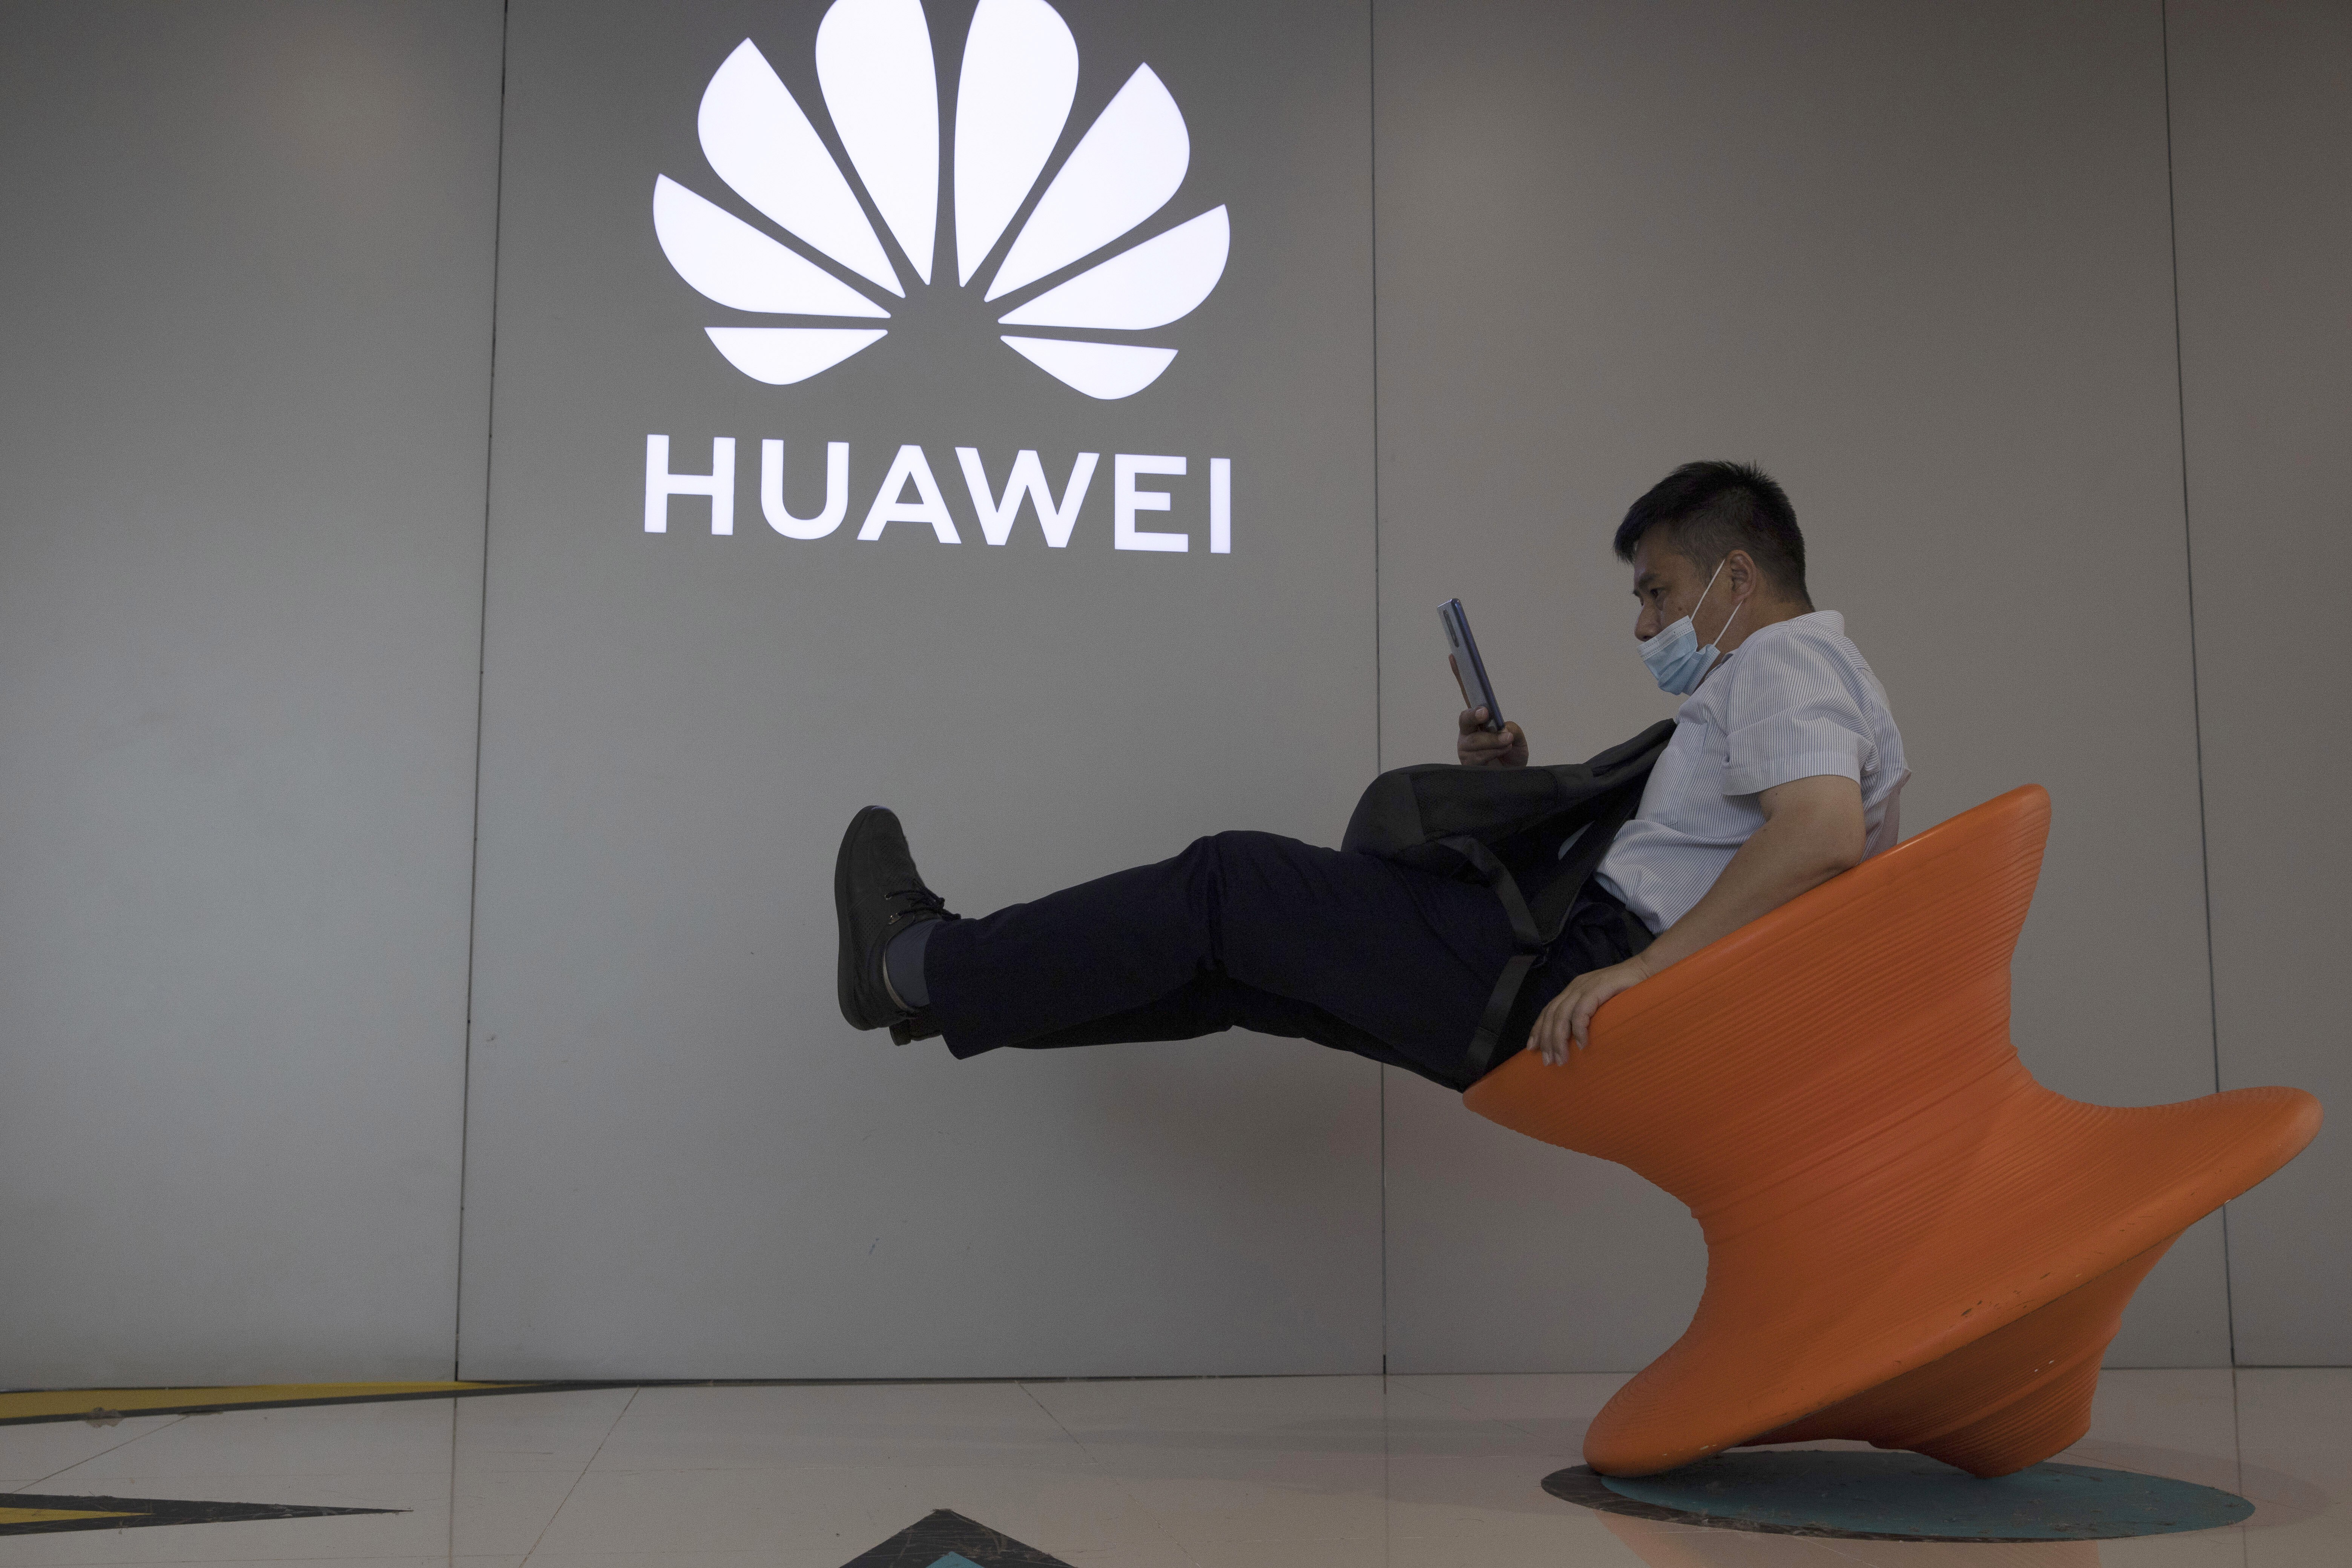 With avenues for sourcing critical chips to power its 5G base stations, smartphones and cloud computing business shut off, Huawei Technologies has very few options left, analysts say. Photo: AP